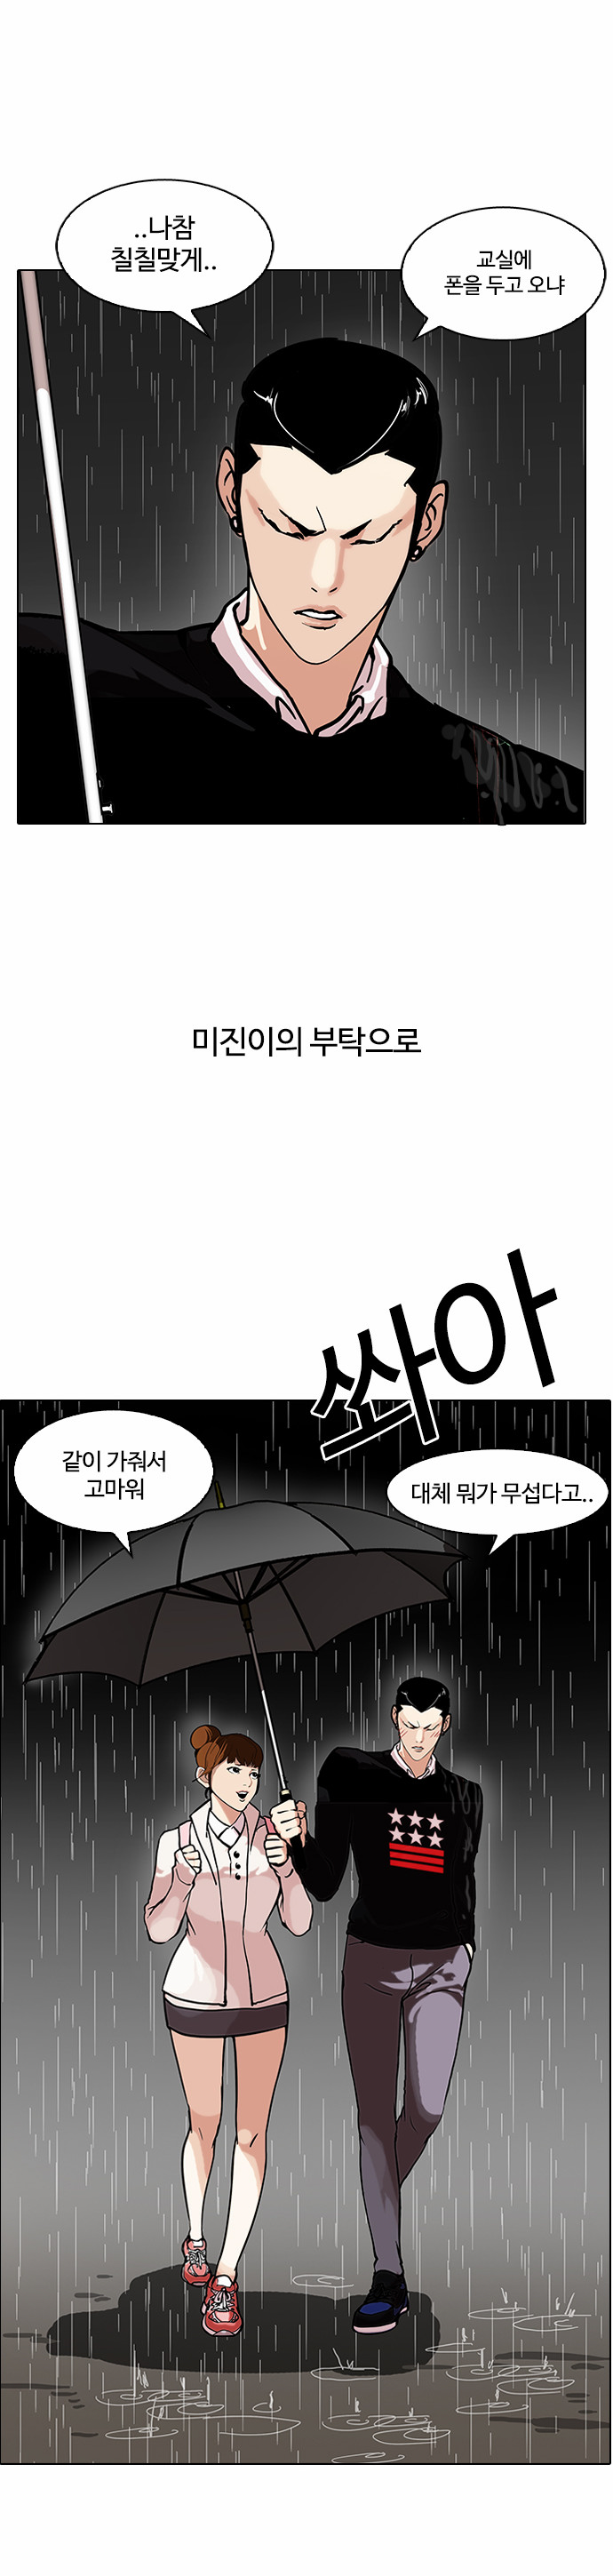 Lookism - Chapter 95 - Page 2